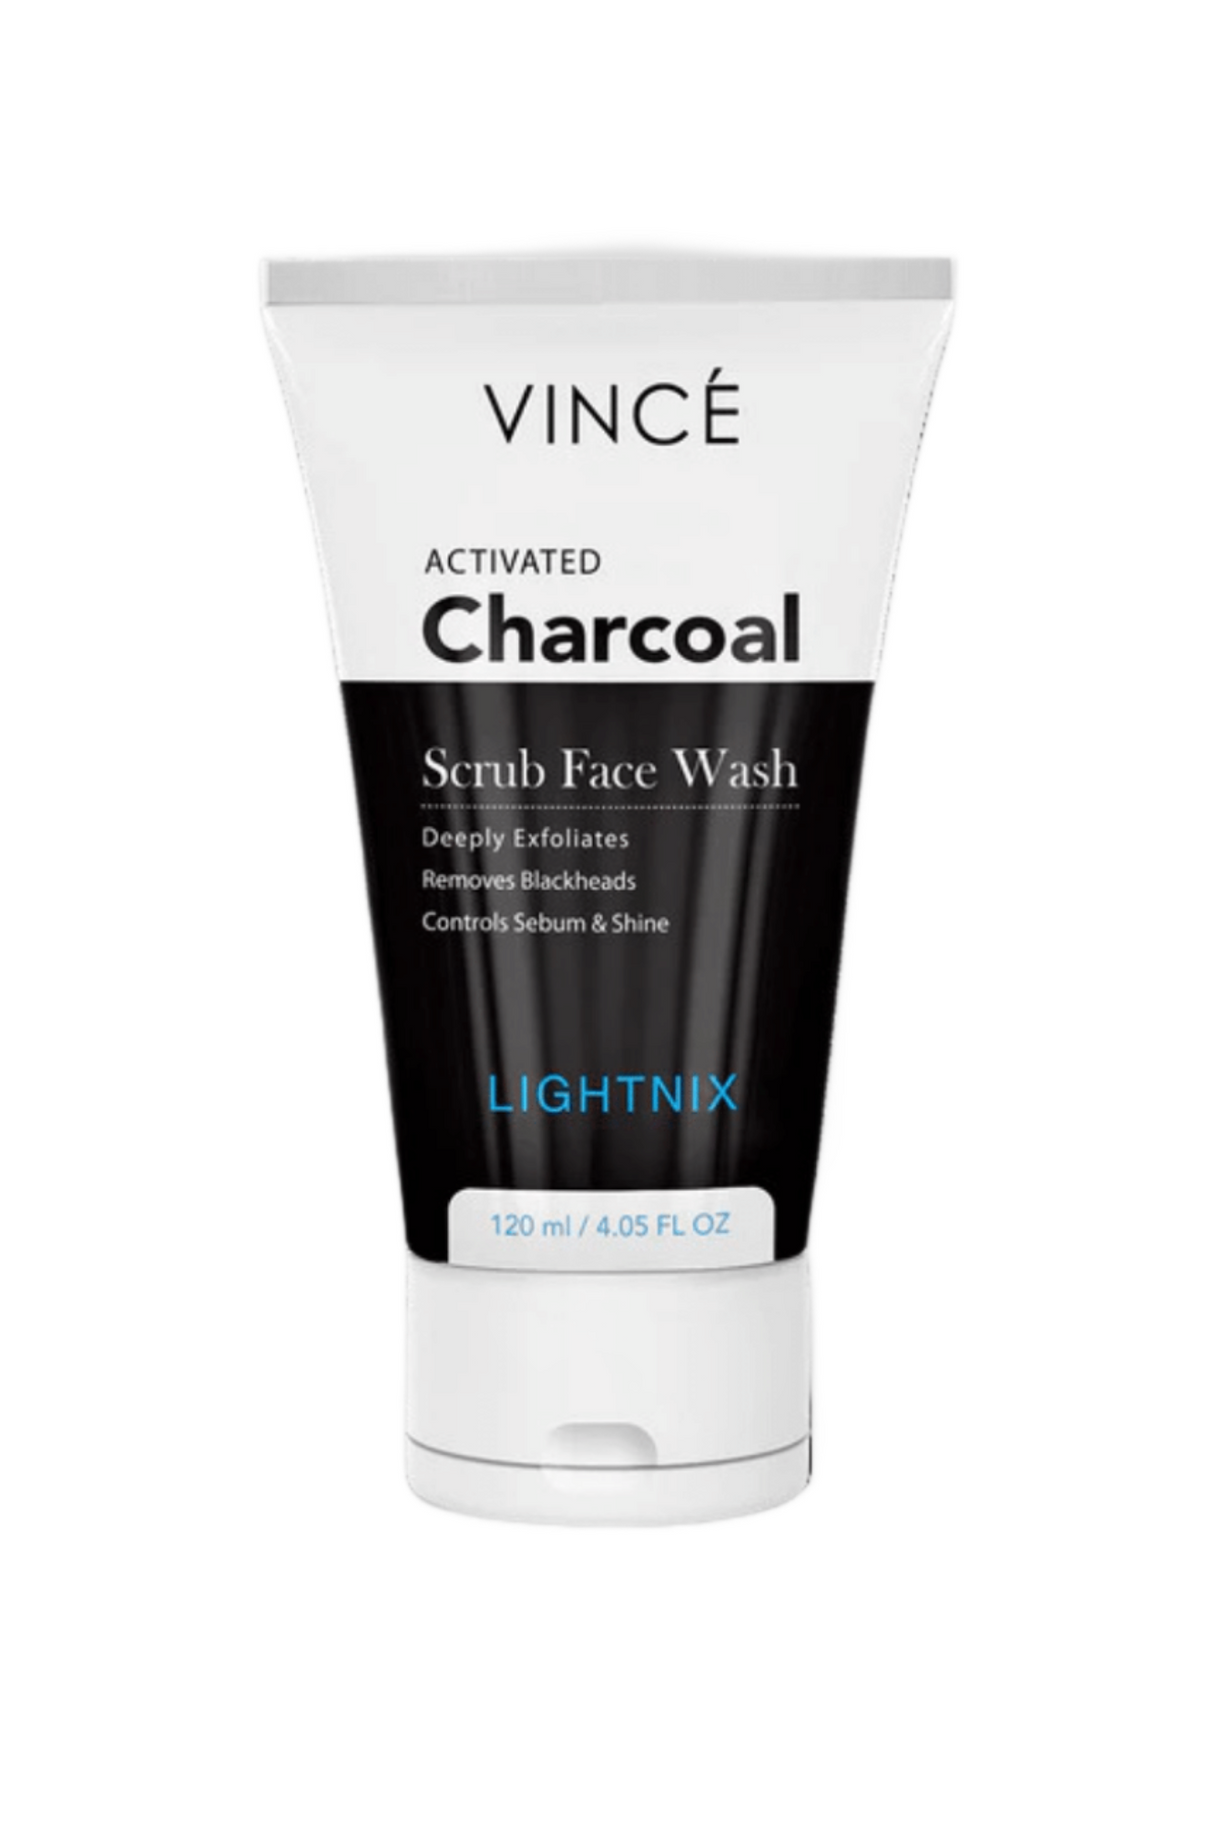 vince face wash charcoal 120ml